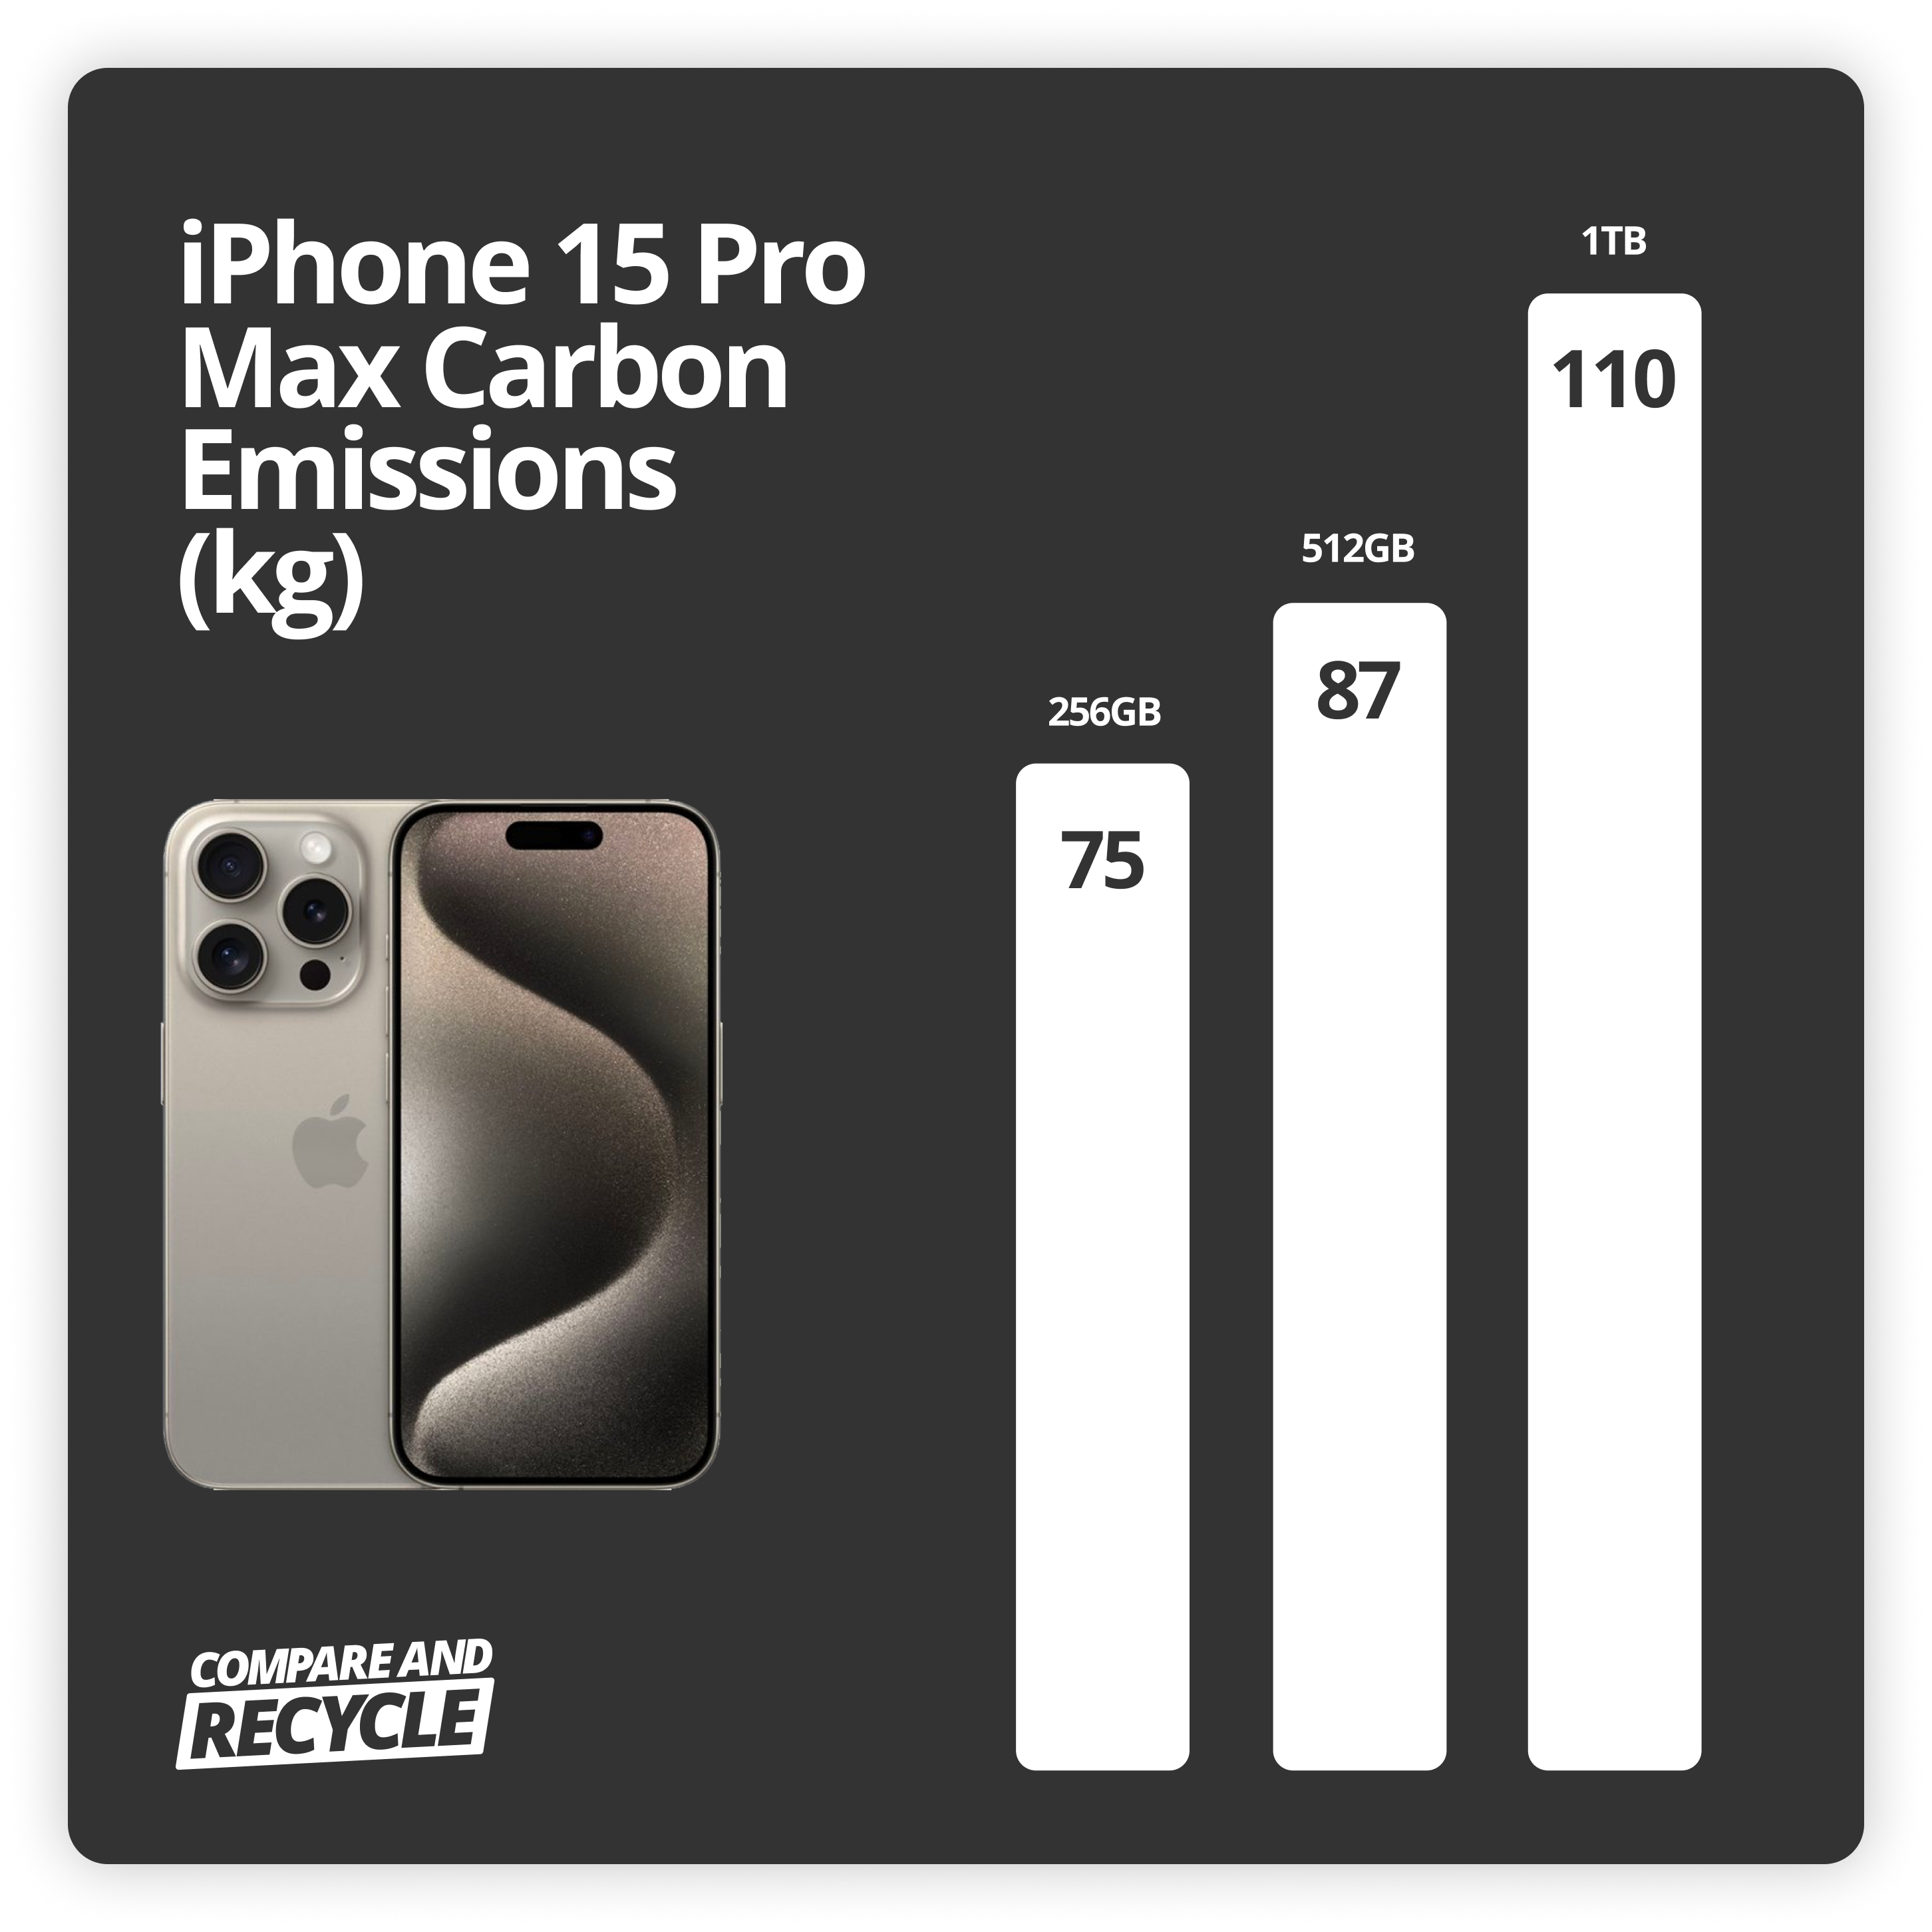 Bar chart showing iPhone 15 Pro Max carbon emissions